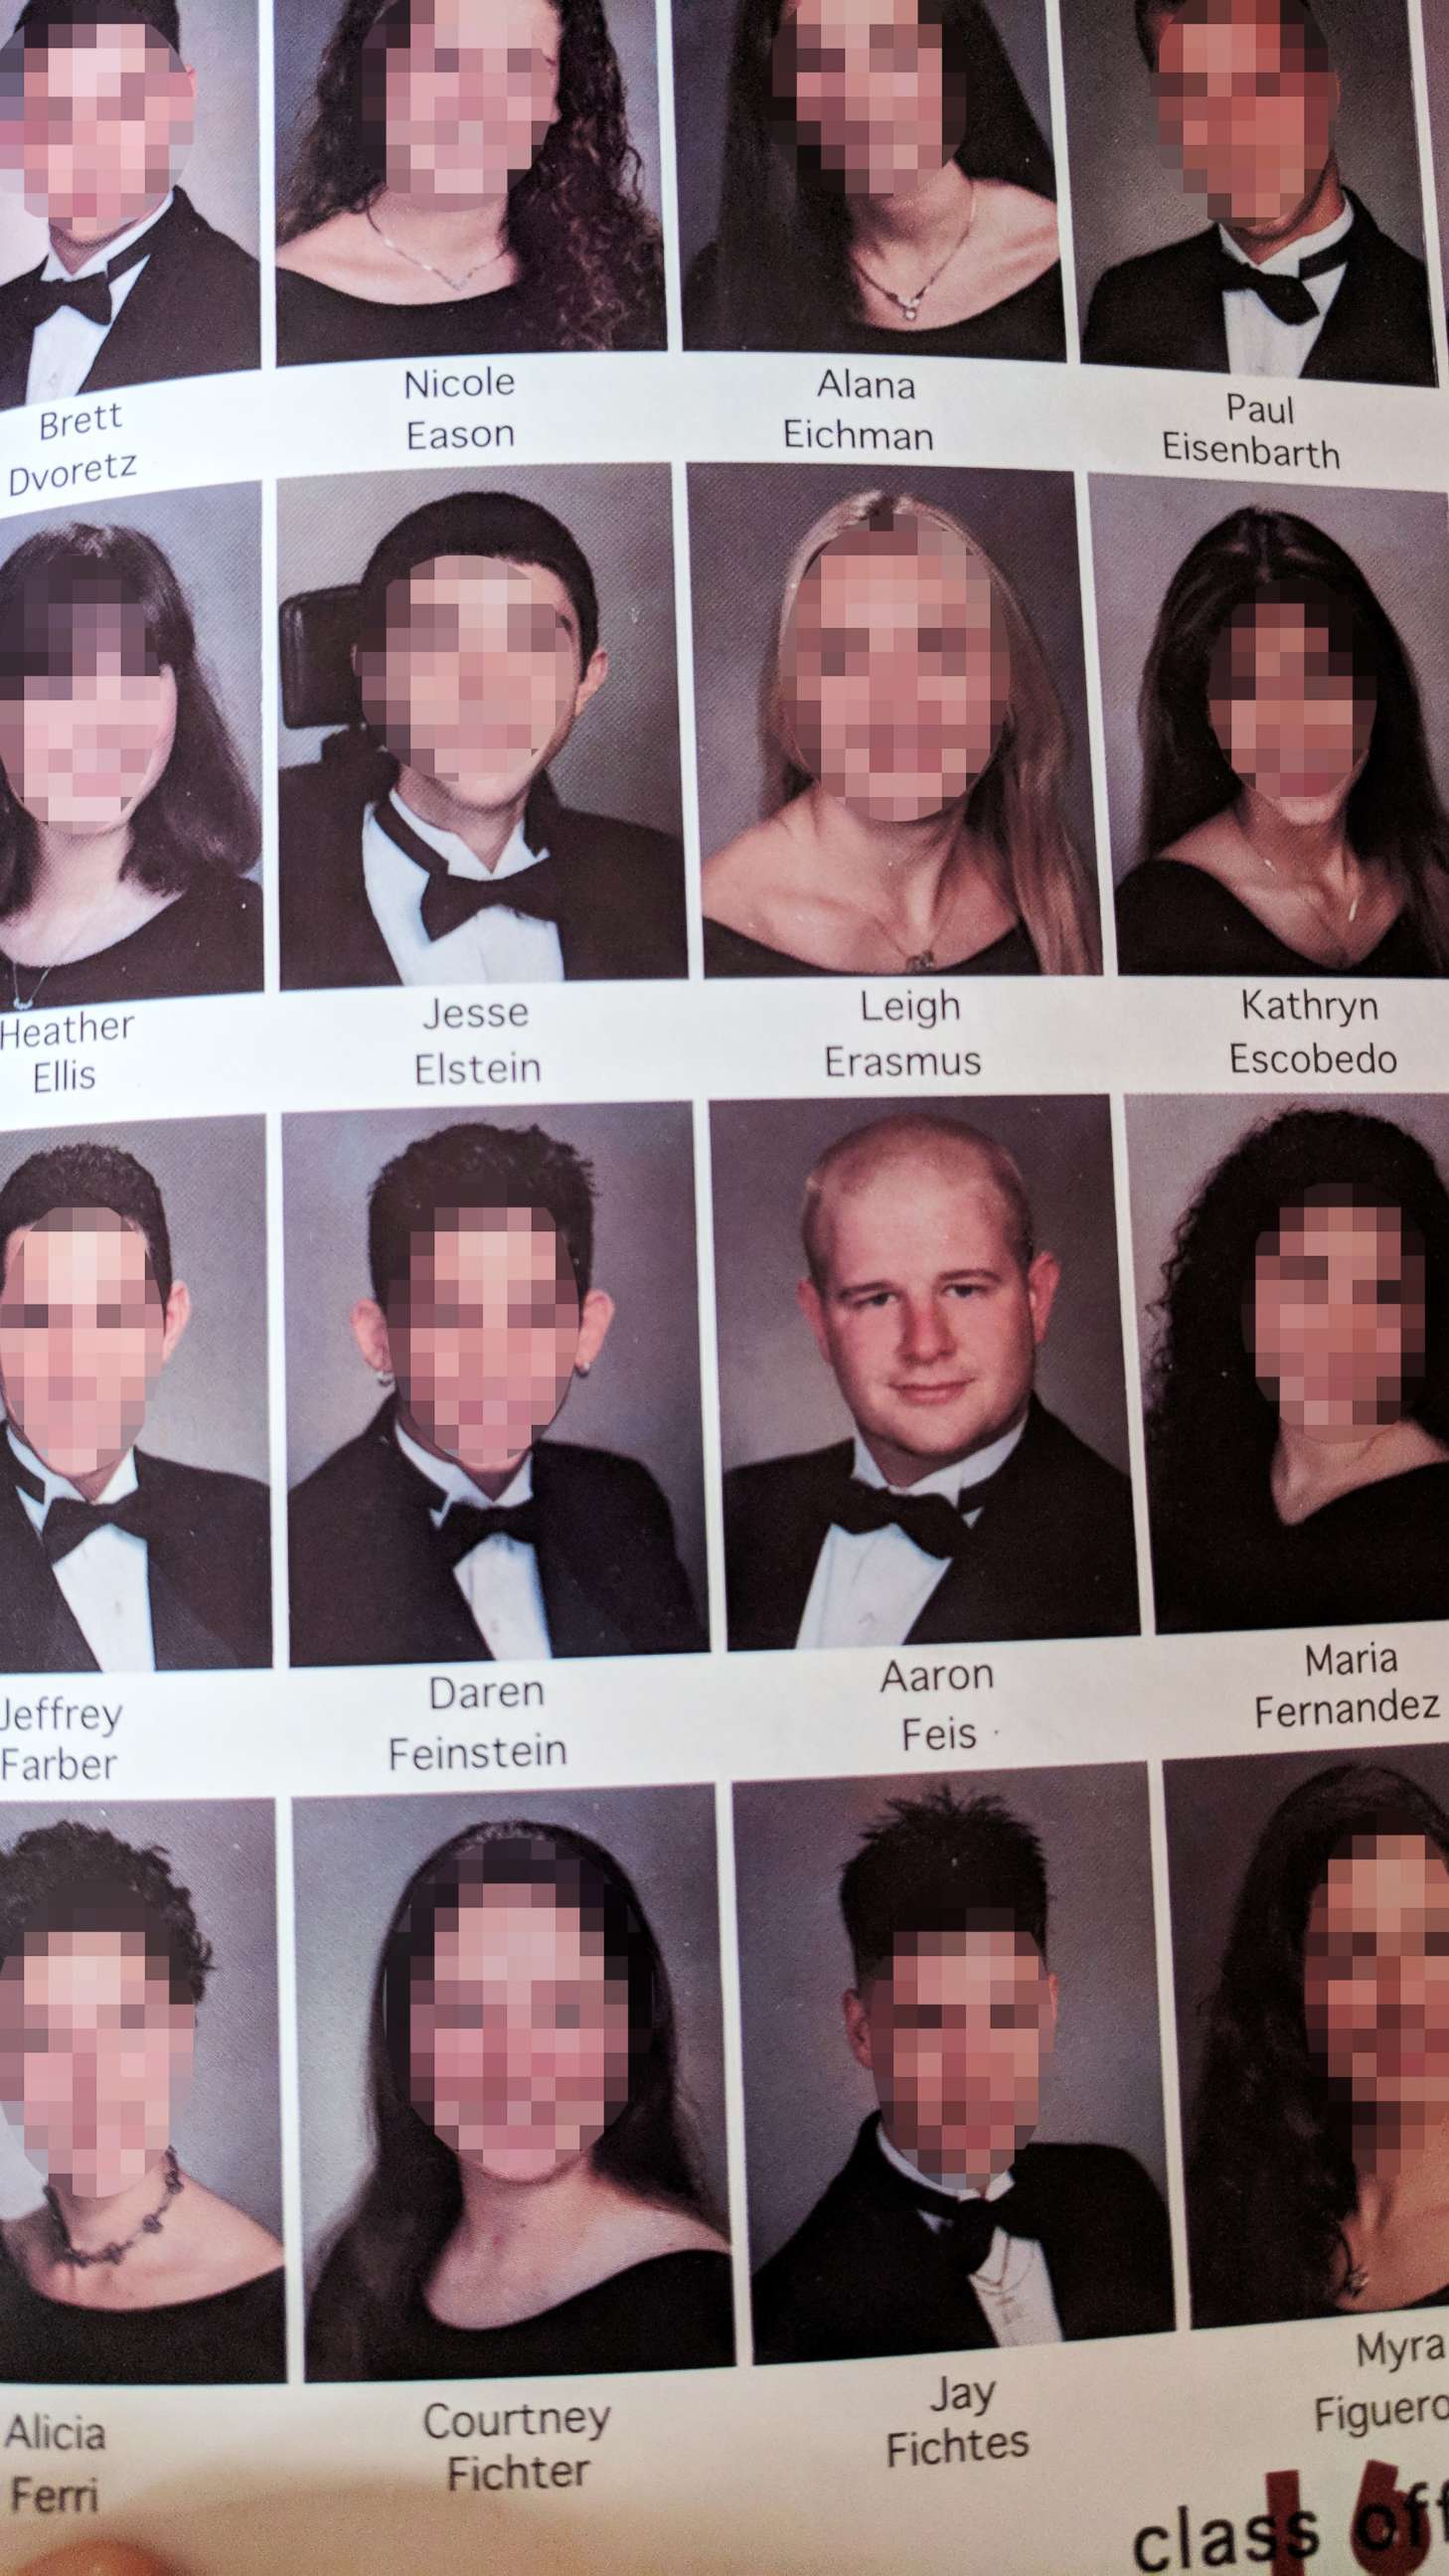 PHOTO: Aaron Feis is pictured in this 1999 yearbook from Marjory Stoneman Douglas High School.